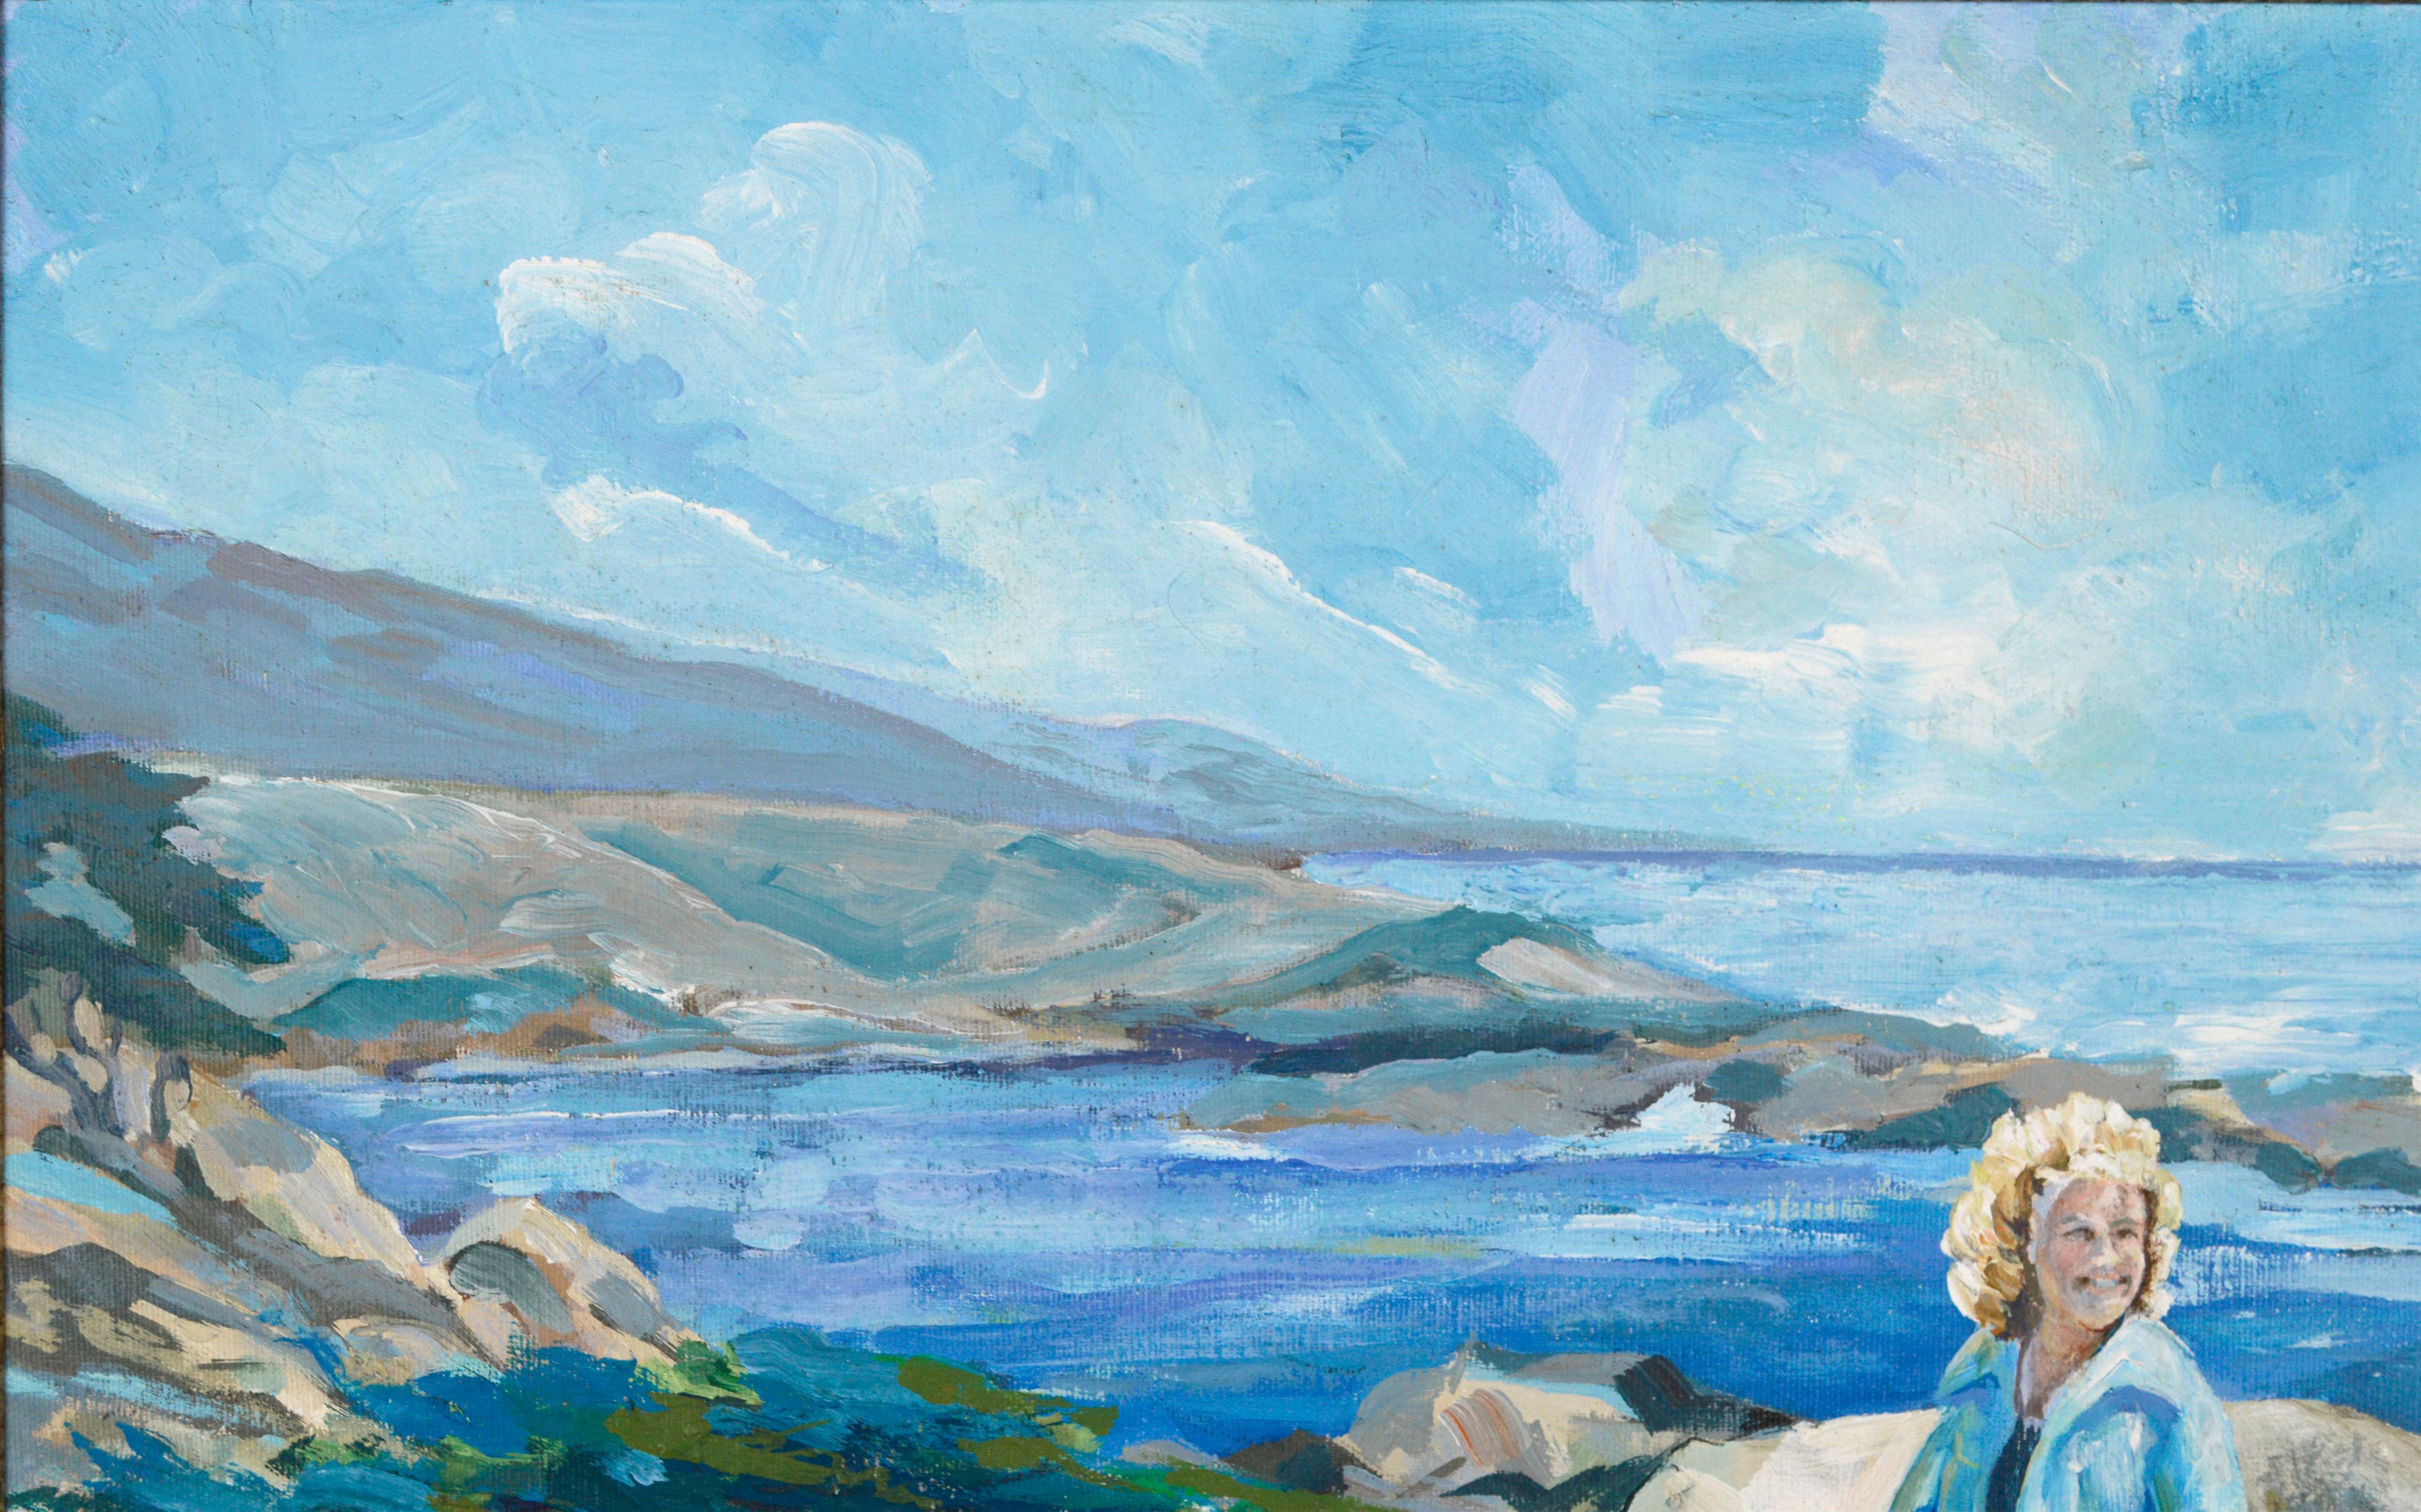 Pacific Grove looking to Big Sur Ocean by Matola
Crashing waves and Cypress Trees and a woman in the sun on the Pacific Grove to Big Sur Coast. Painted in 1983 by California artist named Matola. 
Image, 20